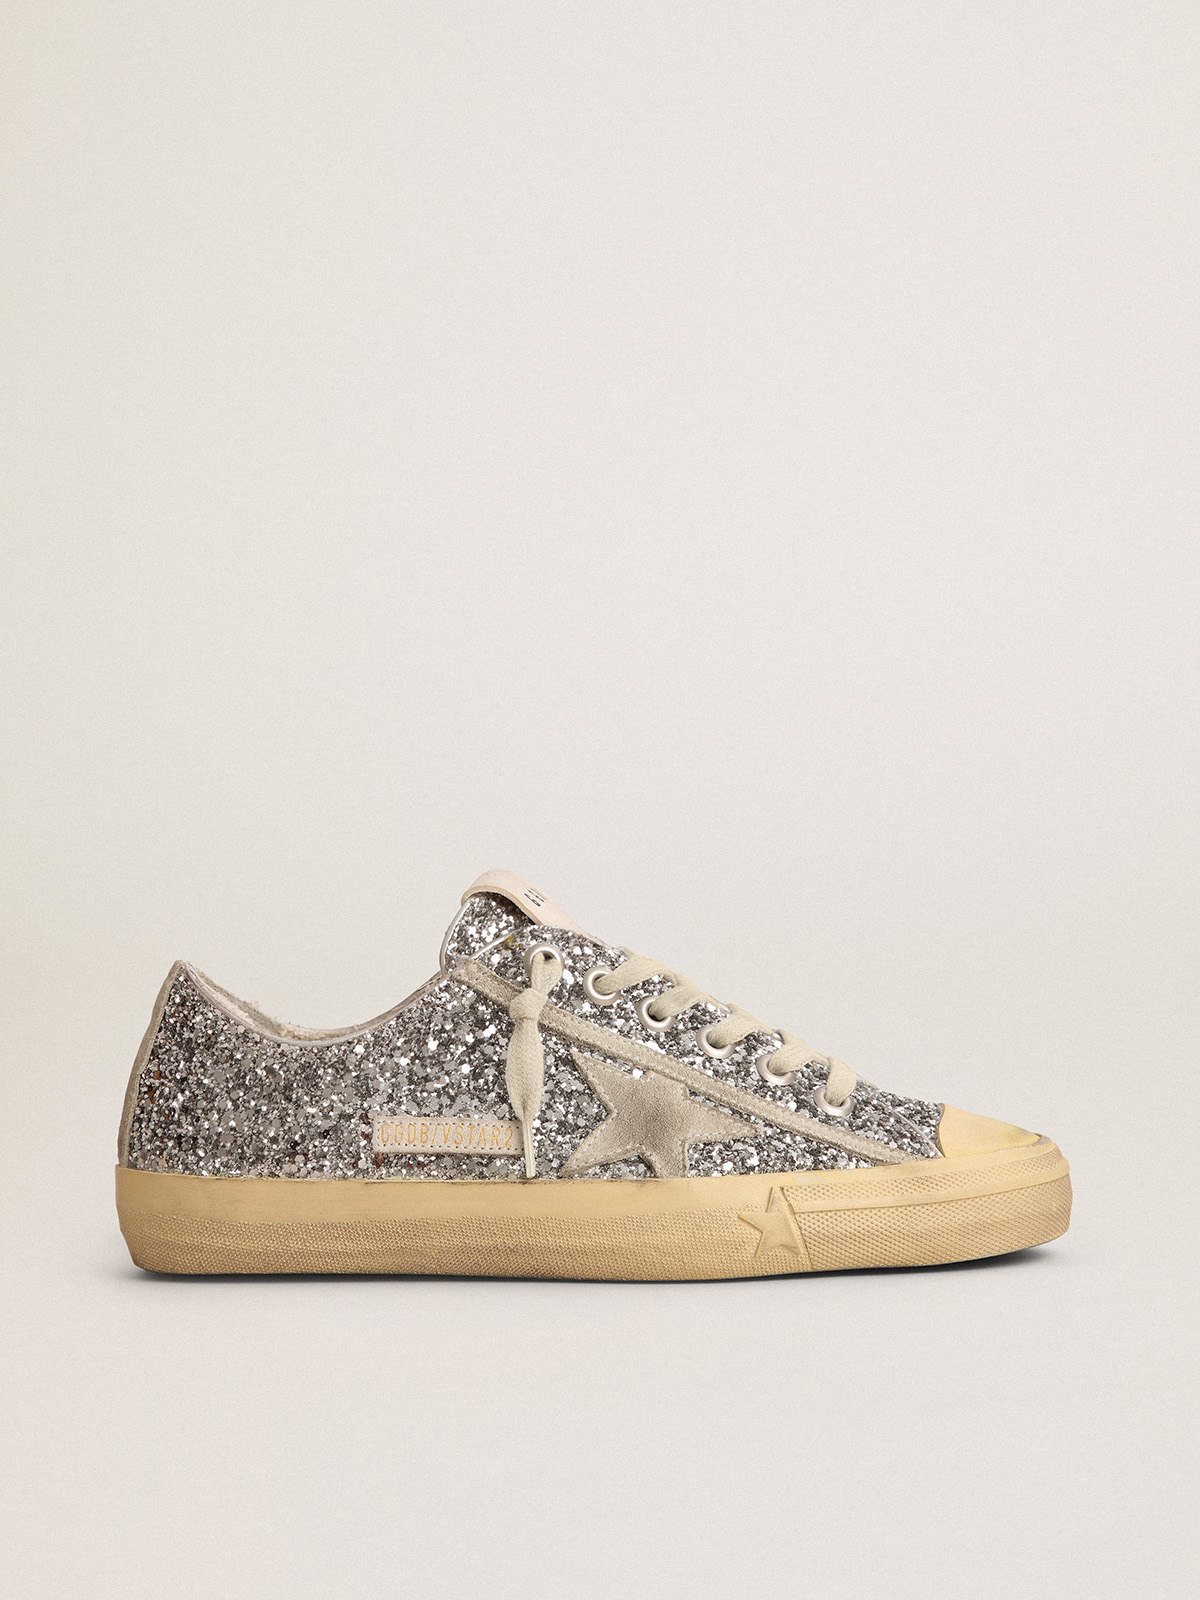 Ball Star Junior in glitter with ice-gray suede inserts